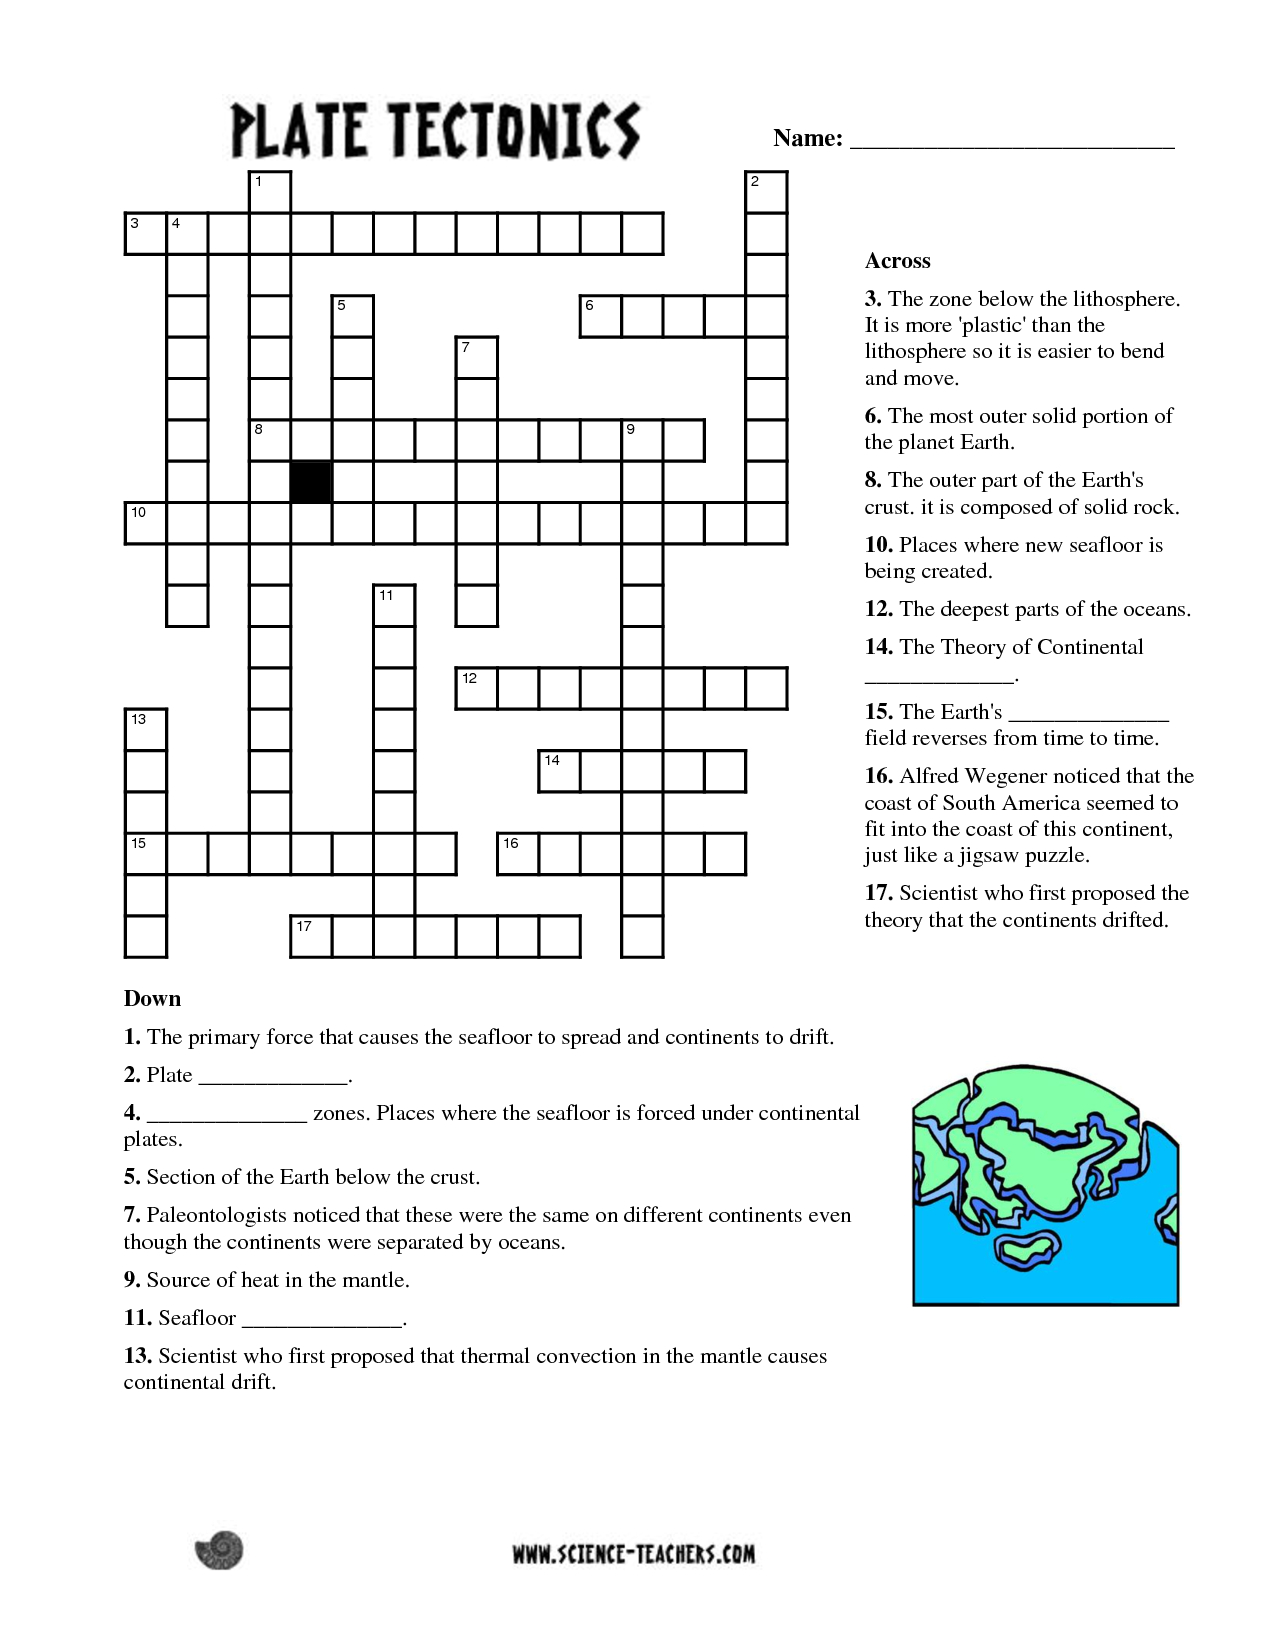 Planets Crossword Puzzle Worksheet - Pics About Space | Fun Science - Printable Science Puzzles